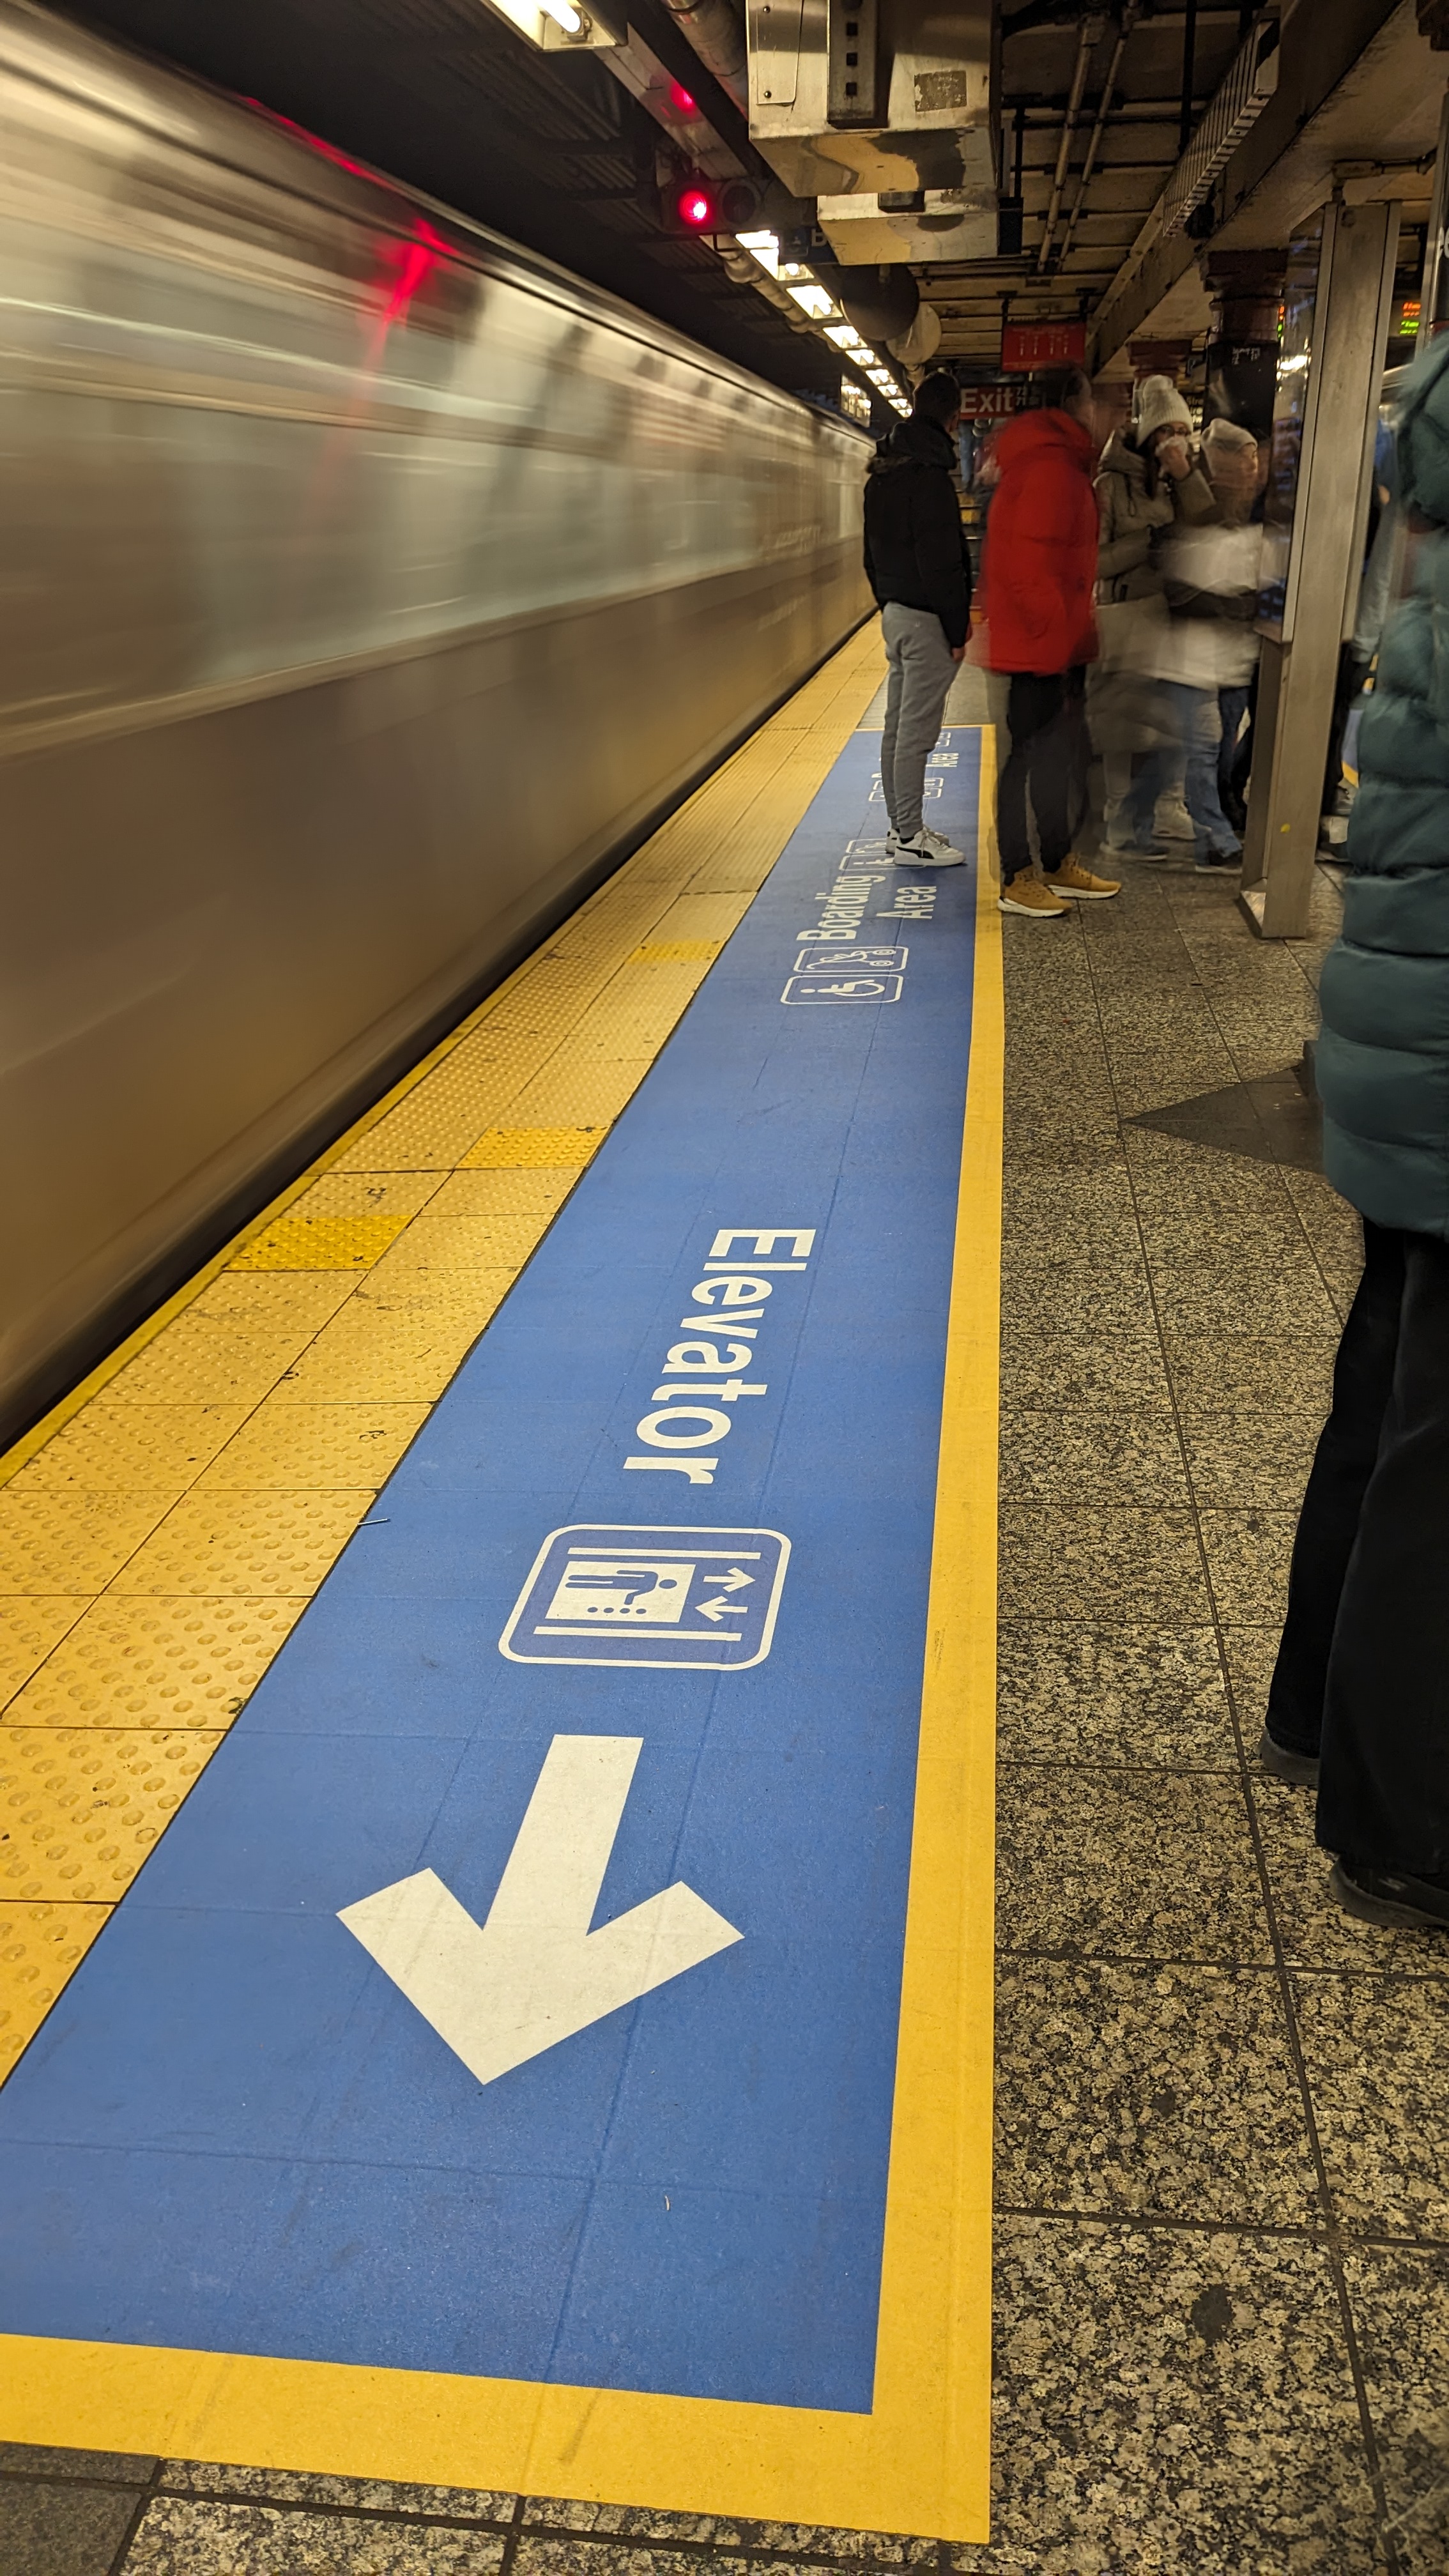 Blue decal with yellow boarder at a platform edge. The decal includes boarding area designation and an arrow pointing towards the elevator.